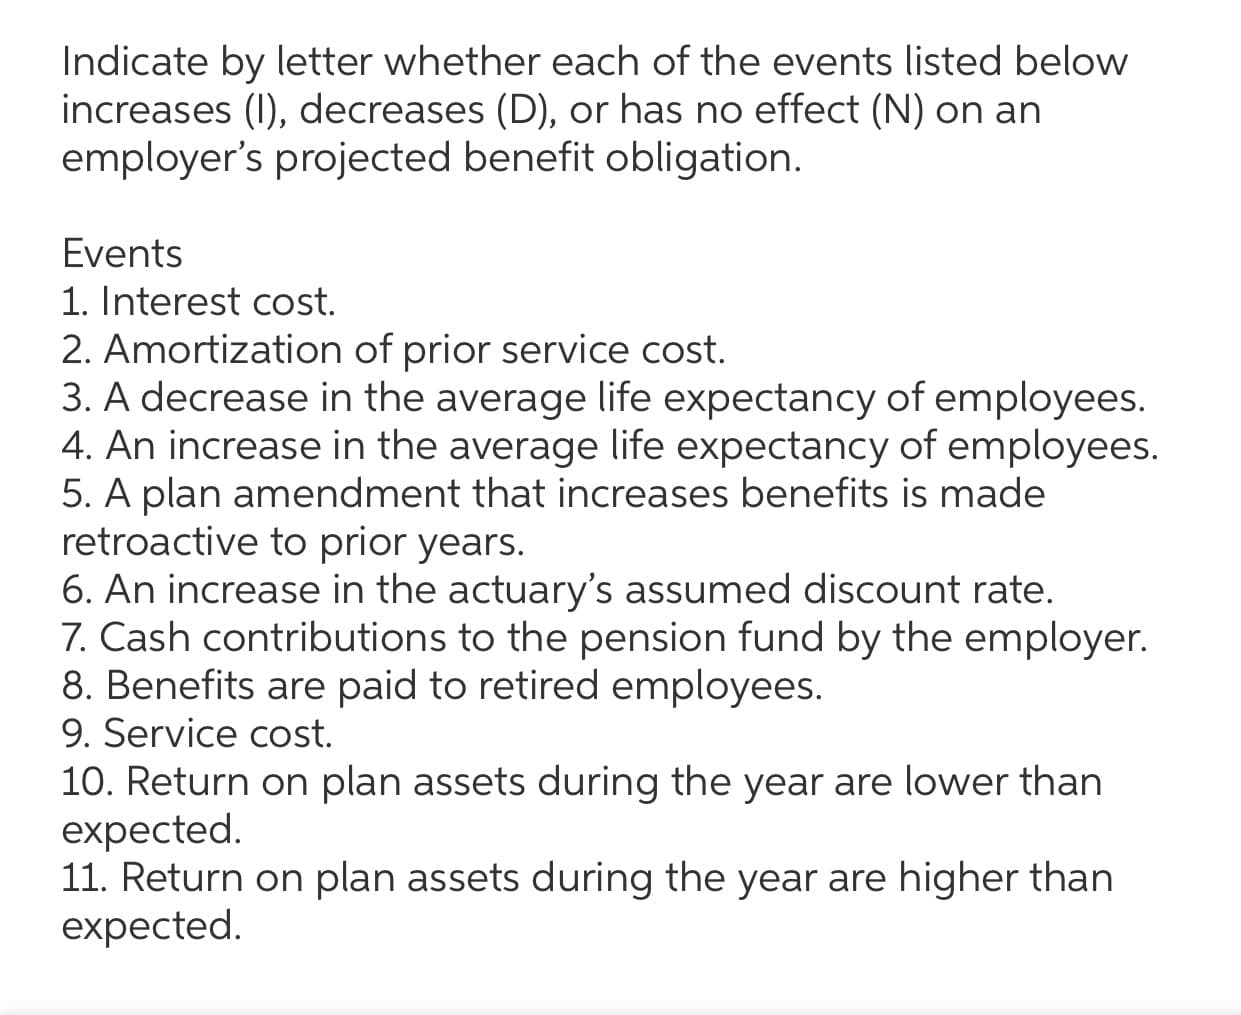 Indicate by letter whether each of the events listed below
increases (I), decreases (D), or has no effect (N) on an
employer's projected benefit obligation.
Events
1. Interest cost.
2. Amortization of prior service cost.
3. A decrease in the average life expectancy of employees.
4. An increase in the average life expectancy of employees.
5. A plan amendment that increases benefits is made
retroactive to prior years.
6. An increase in the actuary's assumed discount rate.
7. Cash contributions to the pension fund by the employer.
8. Benefits are paid to retired employees.
9. Service cost.
10. Return on plan assets during the year are lower than
expected.
11. Return on plan assets during the year are higher than
expected.
